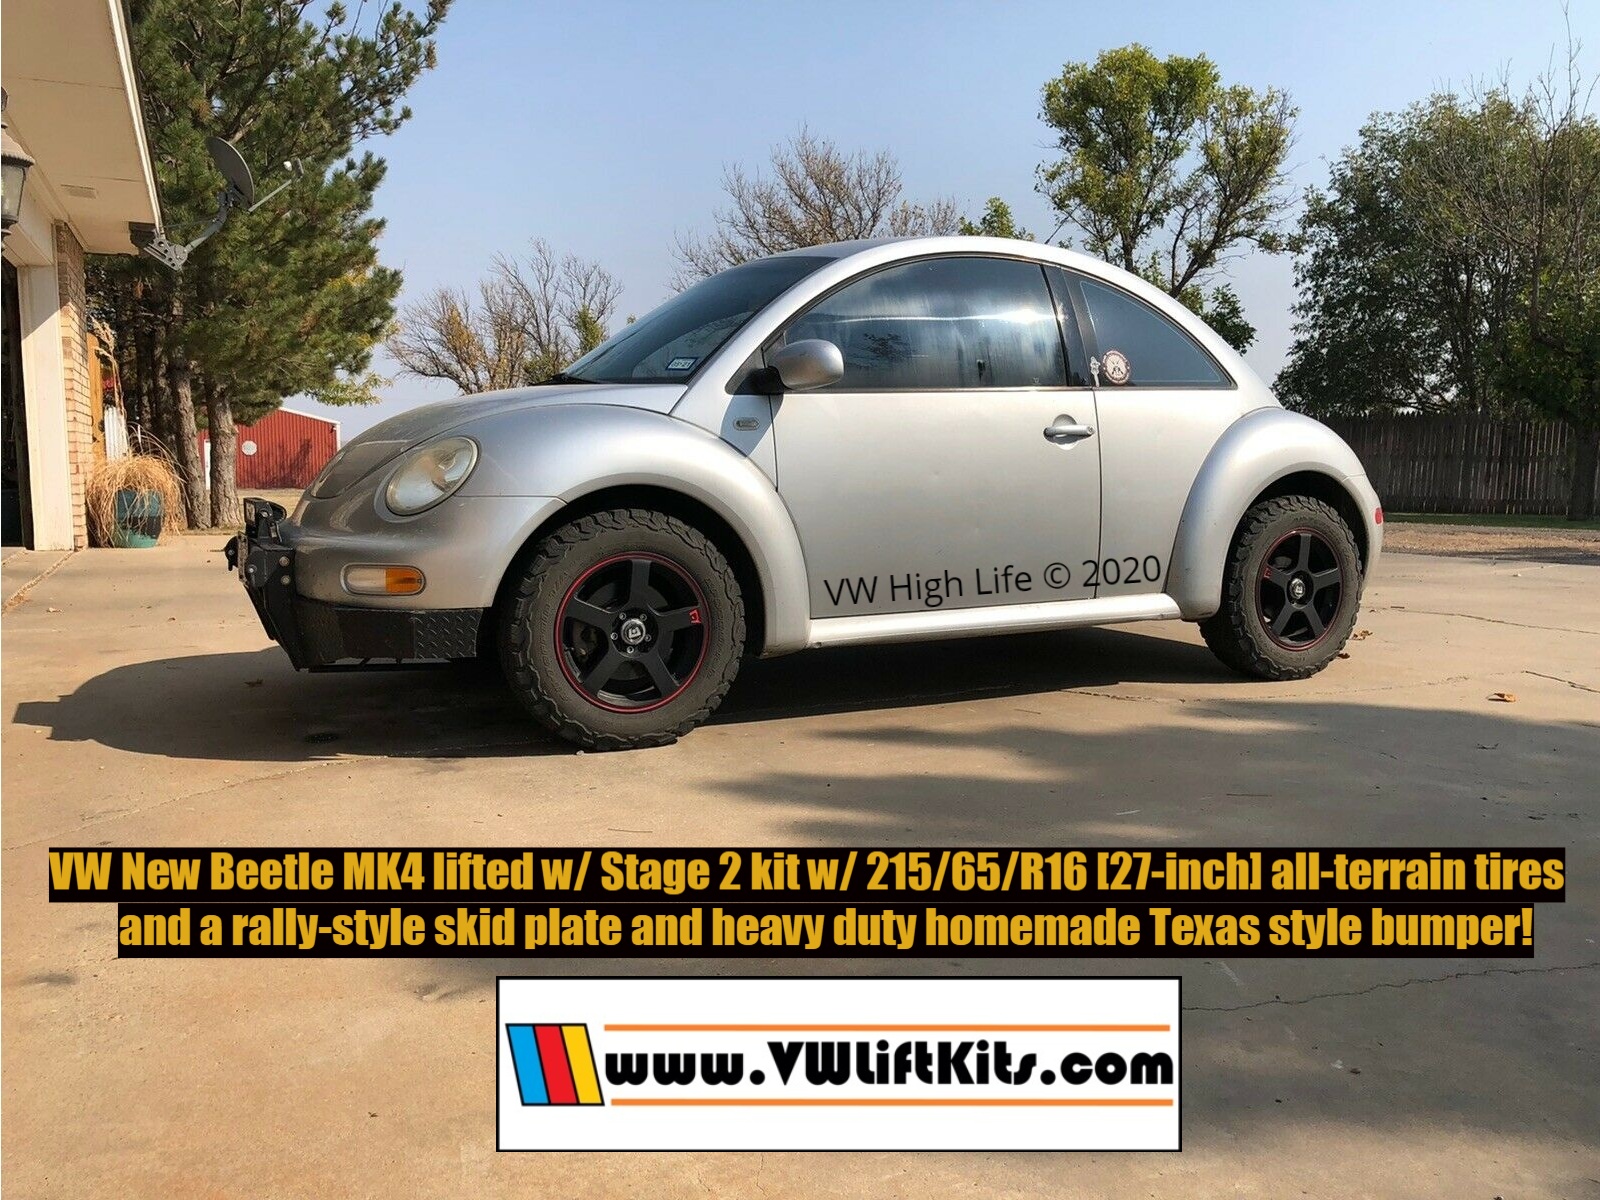 Cliff's VW New Beetle MK4.  Cliff fabricated his own homemade Texas ranch heavy duty bumper!